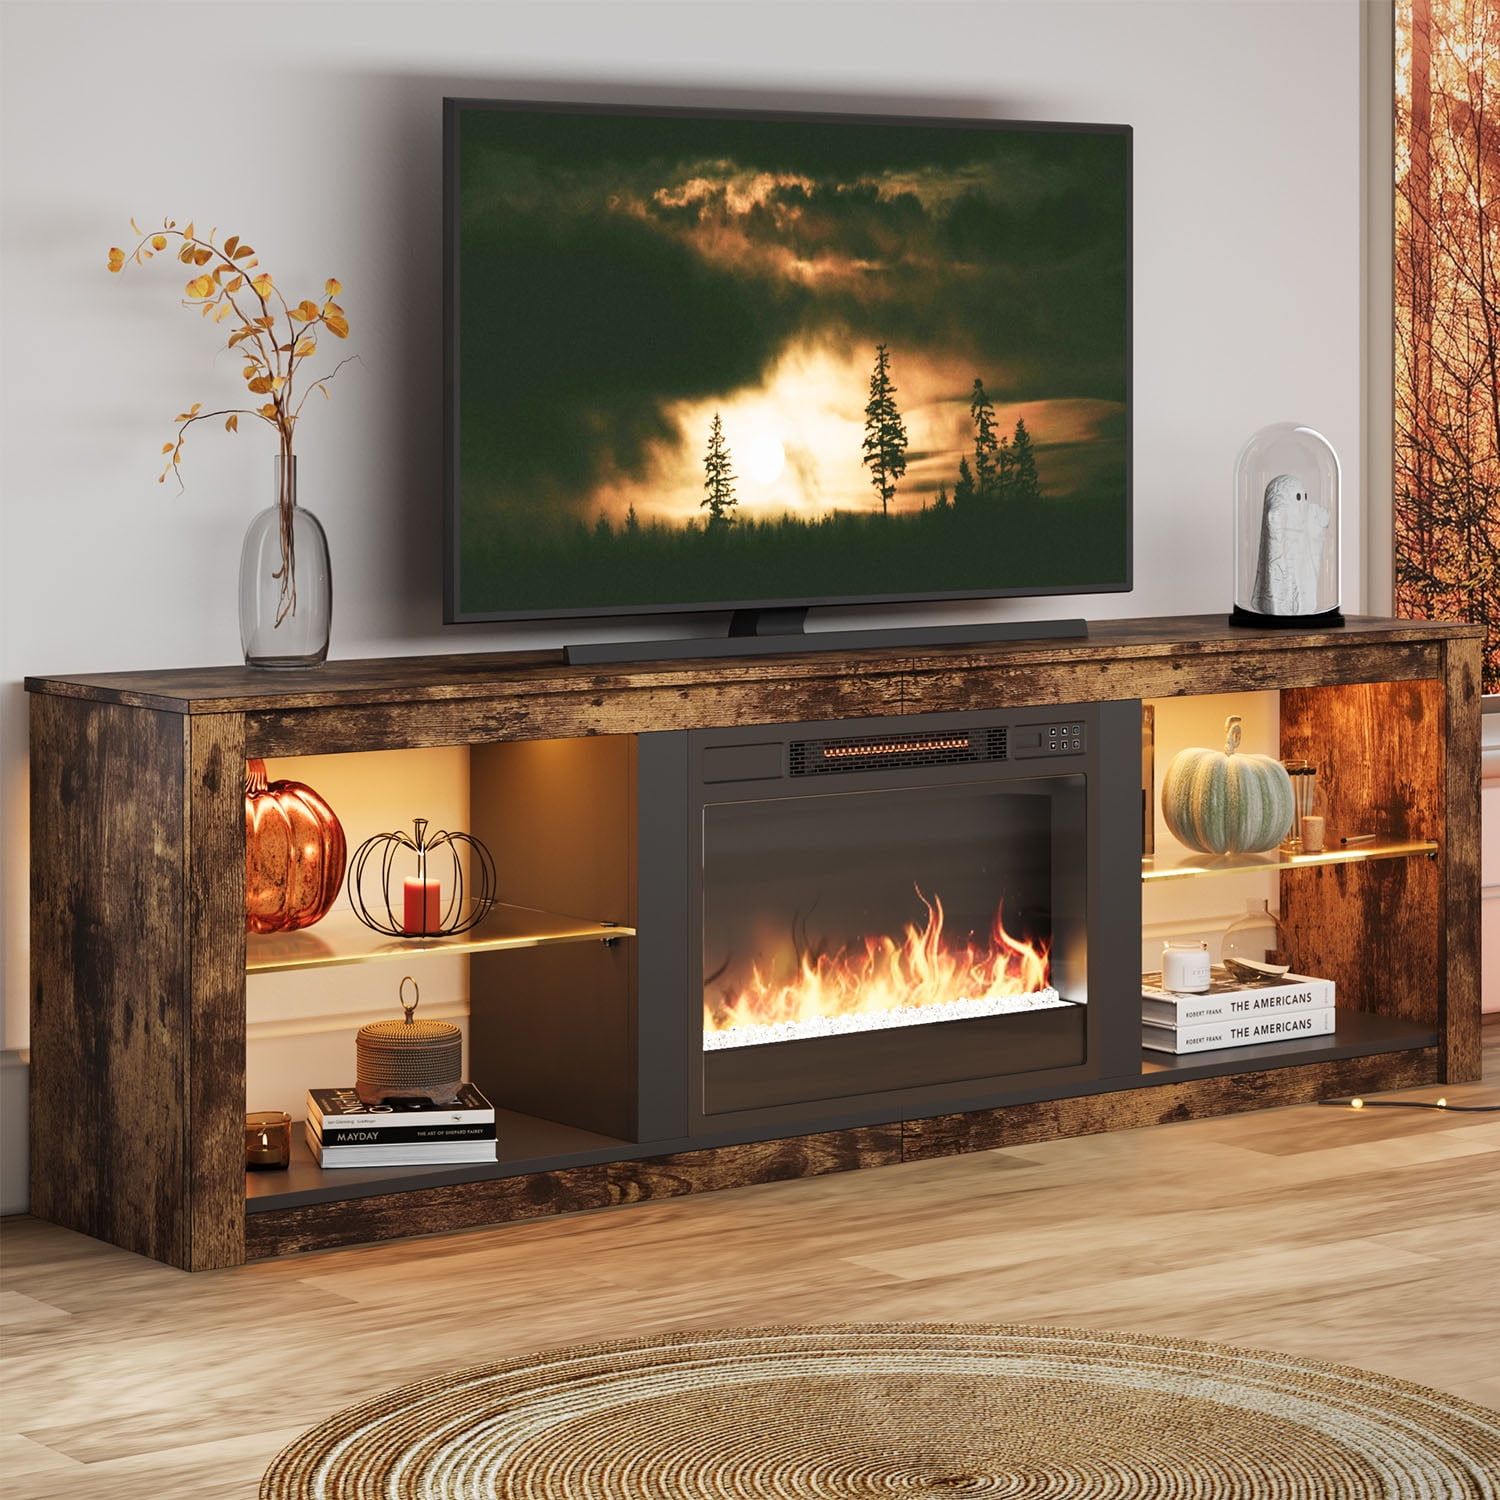 Bestier Fireplace Tv Stand With Led Lights For Tvs Up To 75",Rustic Brown  Finish – Walmart Regarding Bestier Tv Stand For Tvs Up To 75" (Photo 2 of 15)